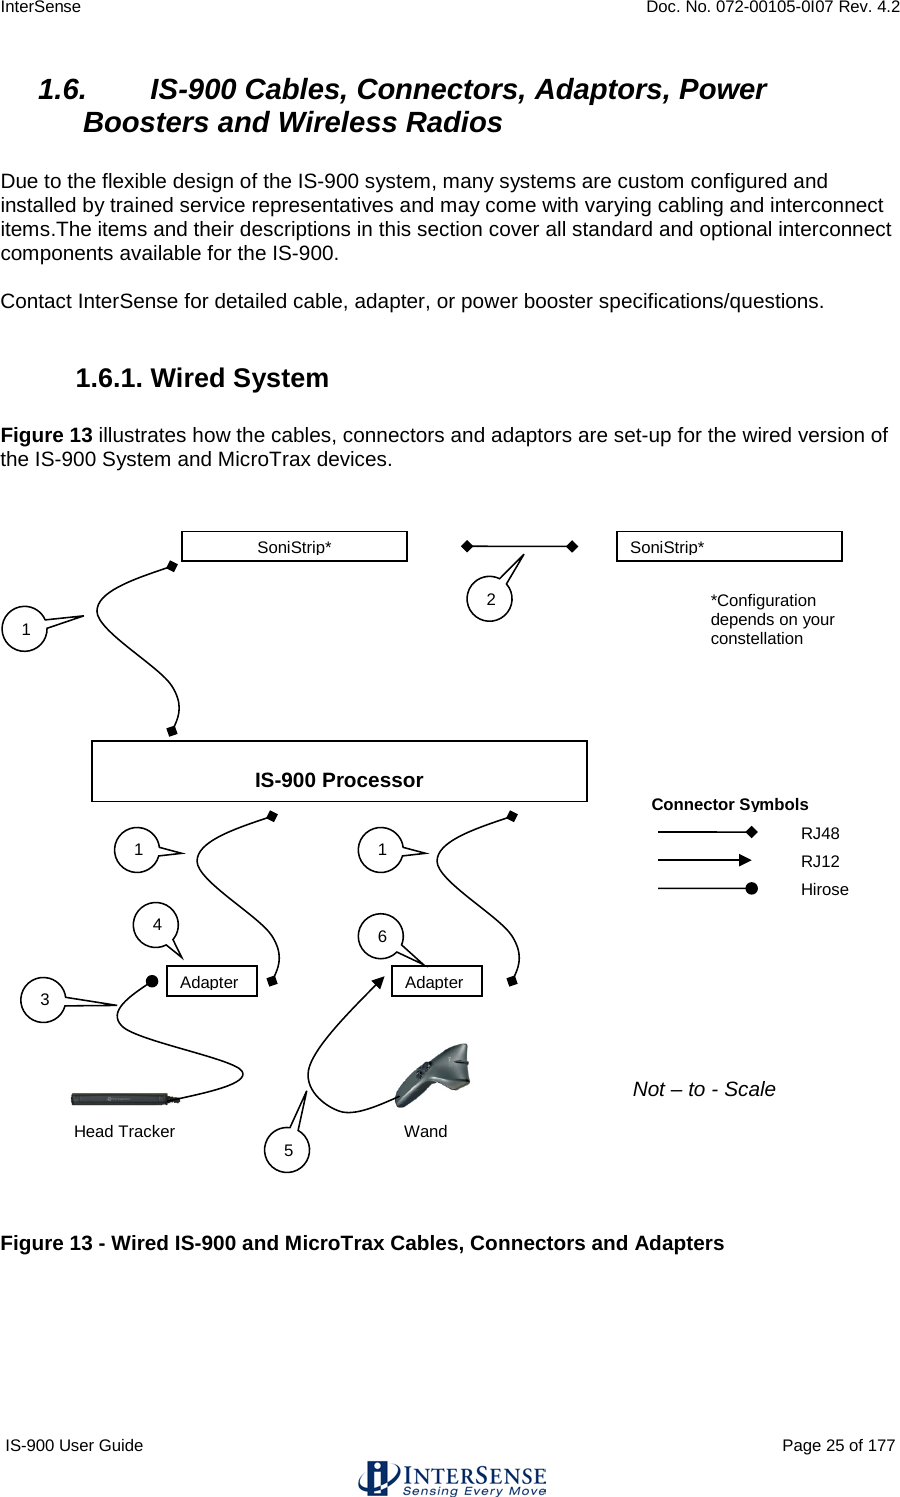 InterSense    Doc. No. 072-00105-0I07 Rev. 4.2 IS-900 User Guide                                                                                                                                          Page 25 of 177  1.6. IS-900 Cables, Connectors, Adaptors, Power Boosters and Wireless Radios  Due to the flexible design of the IS-900 system, many systems are custom configured and installed by trained service representatives and may come with varying cabling and interconnect items.The items and their descriptions in this section cover all standard and optional interconnect components available for the IS-900.    Contact InterSense for detailed cable, adapter, or power booster specifications/questions.  1.6.1. Wired System  Figure 13 illustrates how the cables, connectors and adaptors are set-up for the wired version of the IS-900 System and MicroTrax devices.     Figure 13 - Wired IS-900 and MicroTrax Cables, Connectors and Adapters    SoniStrip* SoniStrip* 1 2 IS-900 Processor Head Tracker Not – to - Scale Adapter RJ48 RJ12 Hirose Connector Symbols Wand Adapter  3 4 5 6 1 1 *Configuration depends on your constellation 